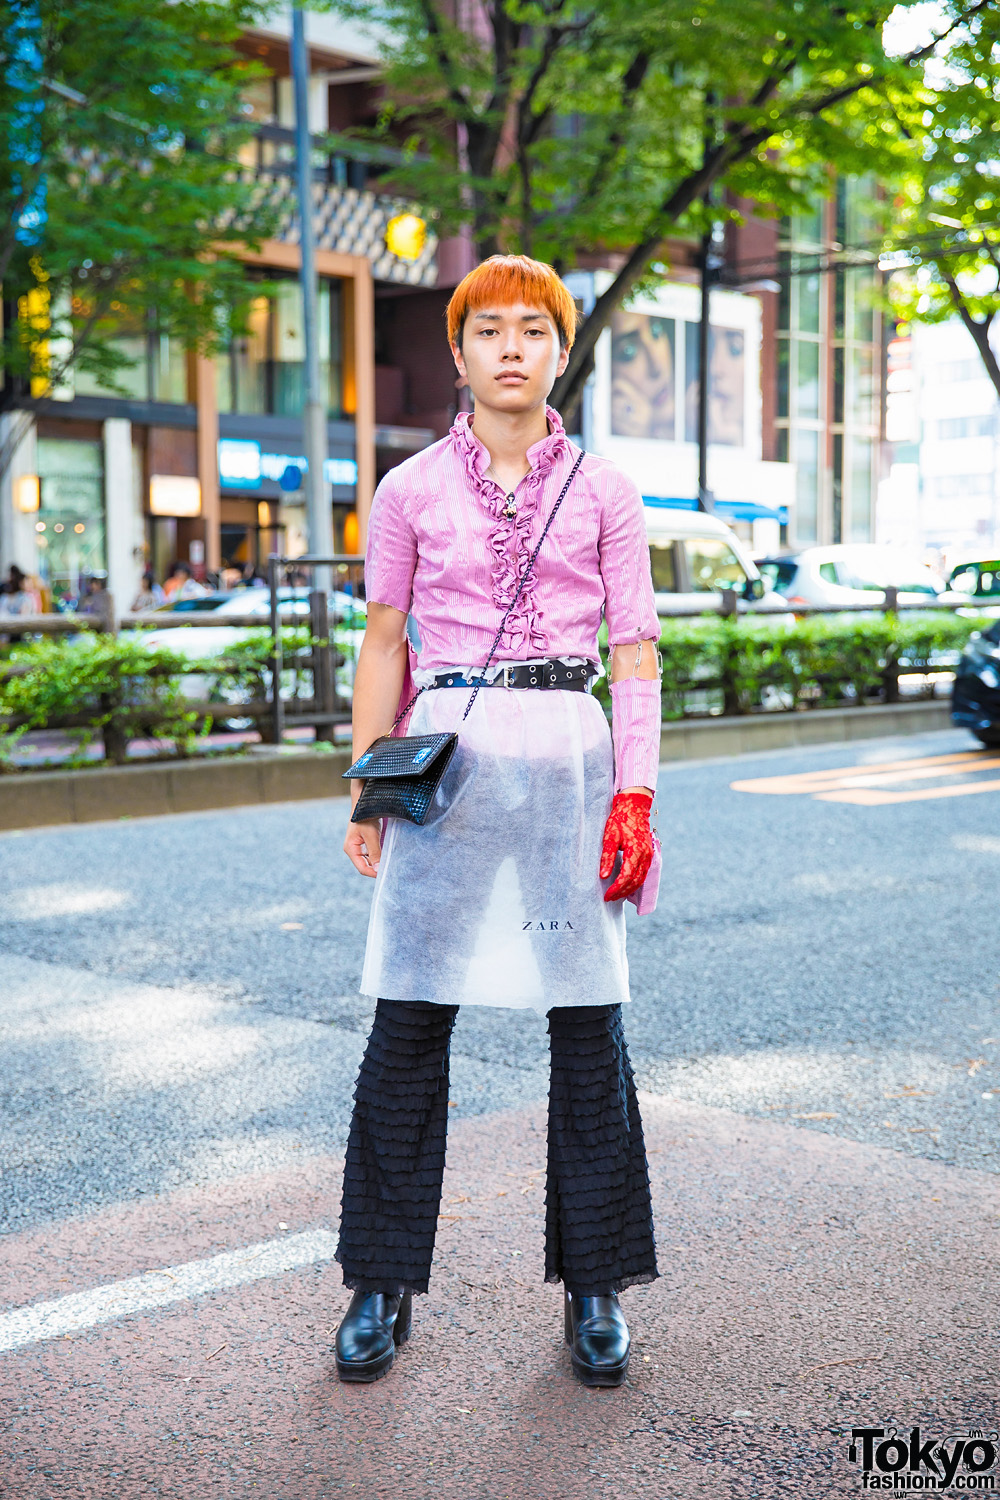 Tokyo Vintage Street Fashion w/ Pink Ruffle Top, Black Ruffle Pants, Red Floral Lace Glove & Black Heeled Boots